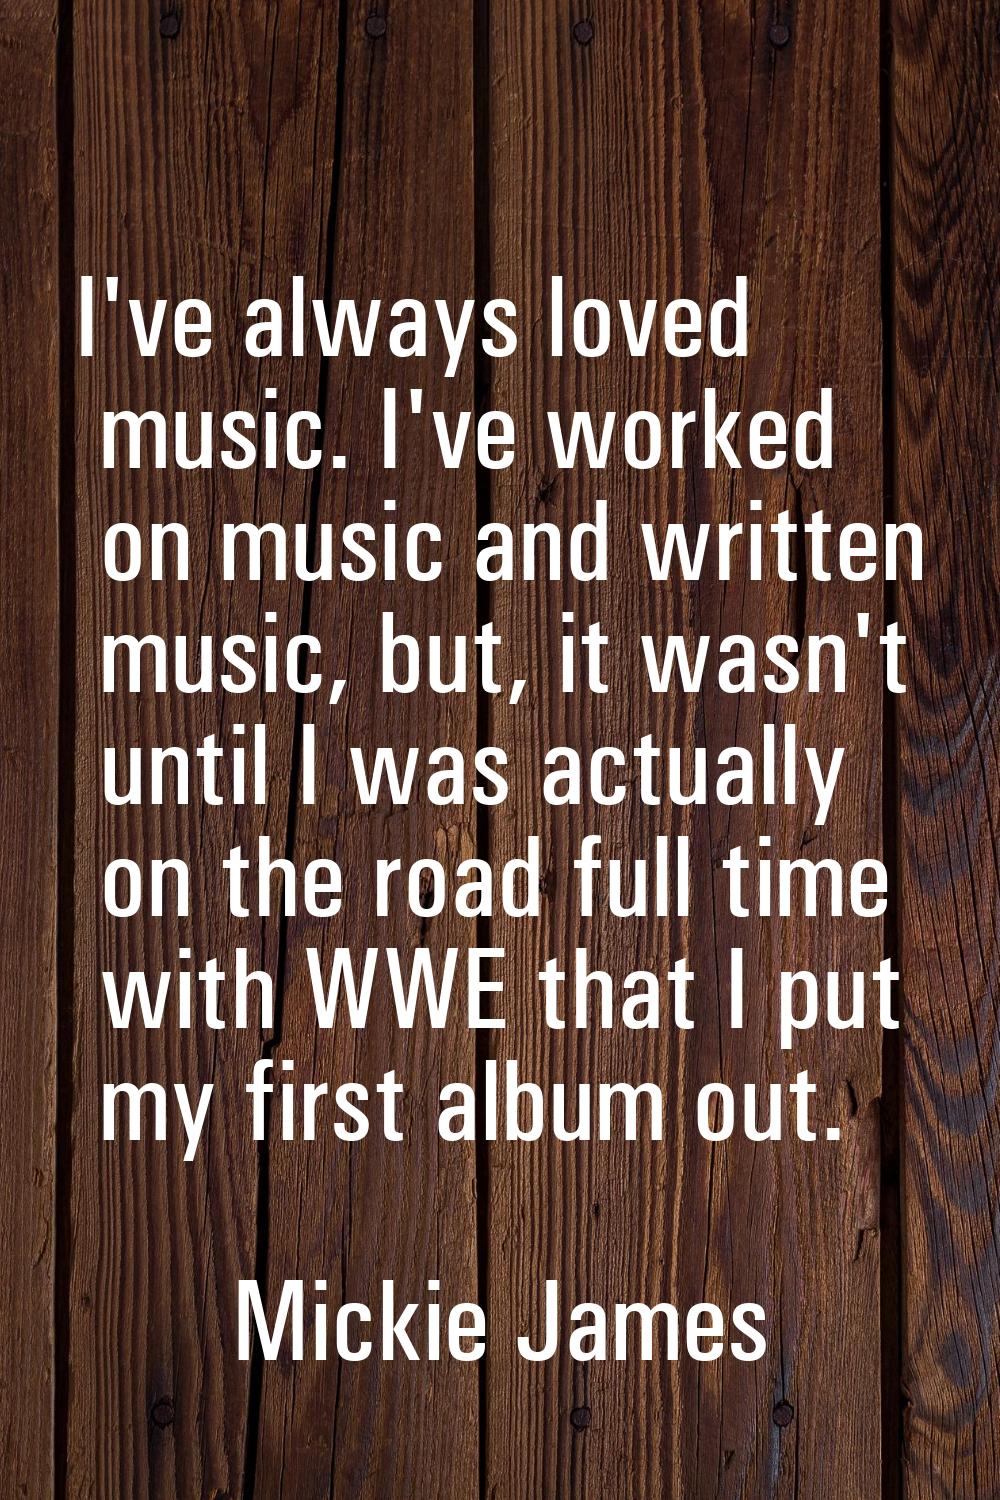 I've always loved music. I've worked on music and written music, but, it wasn't until I was actuall